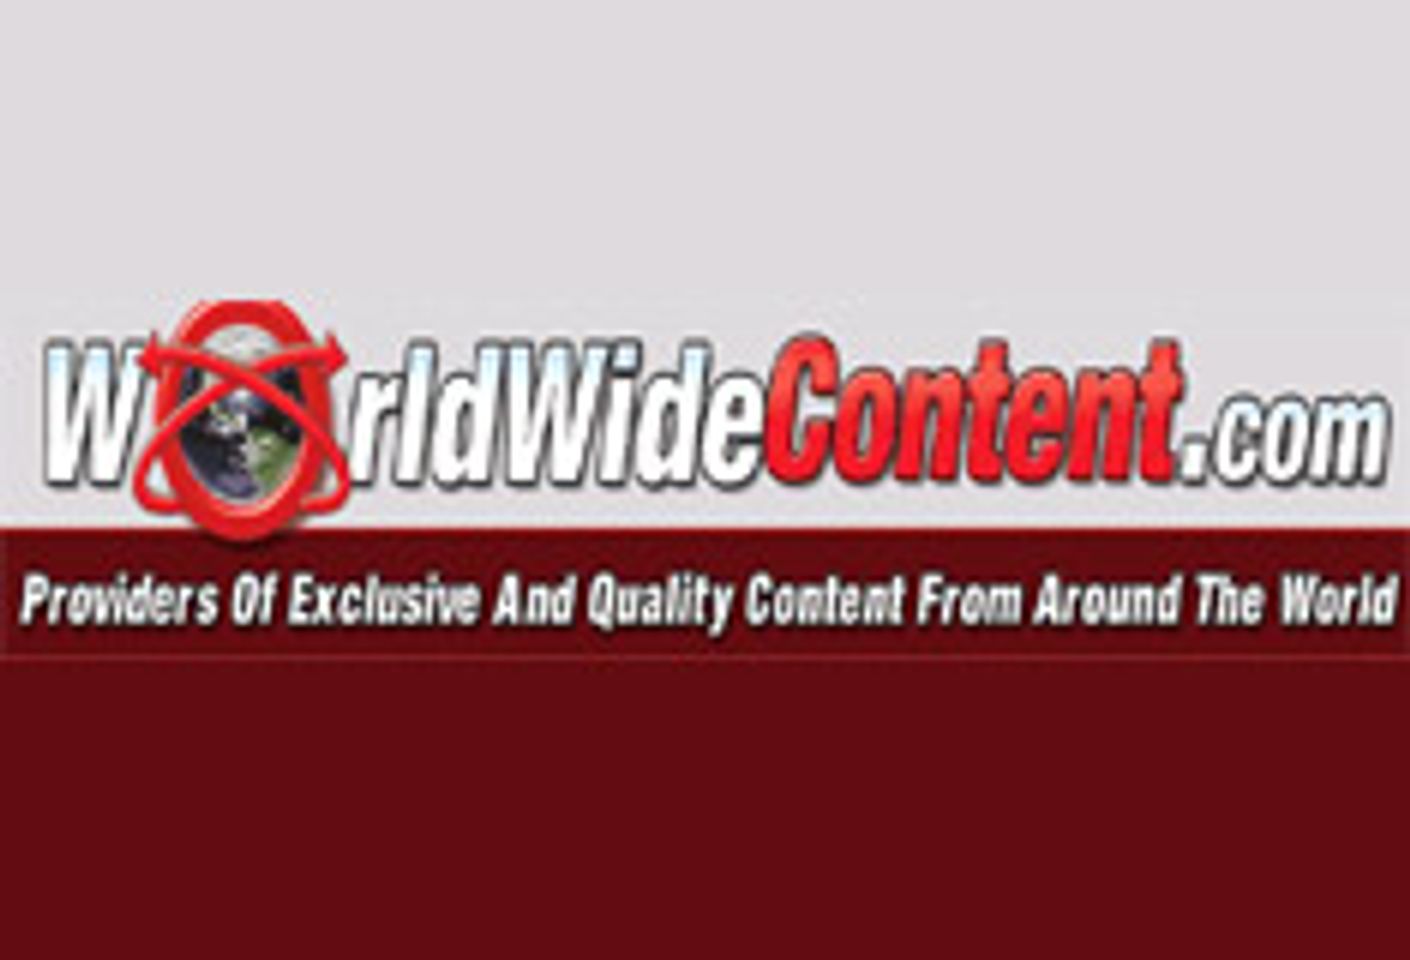 WorldWideContent.com Version 2.0 Launched